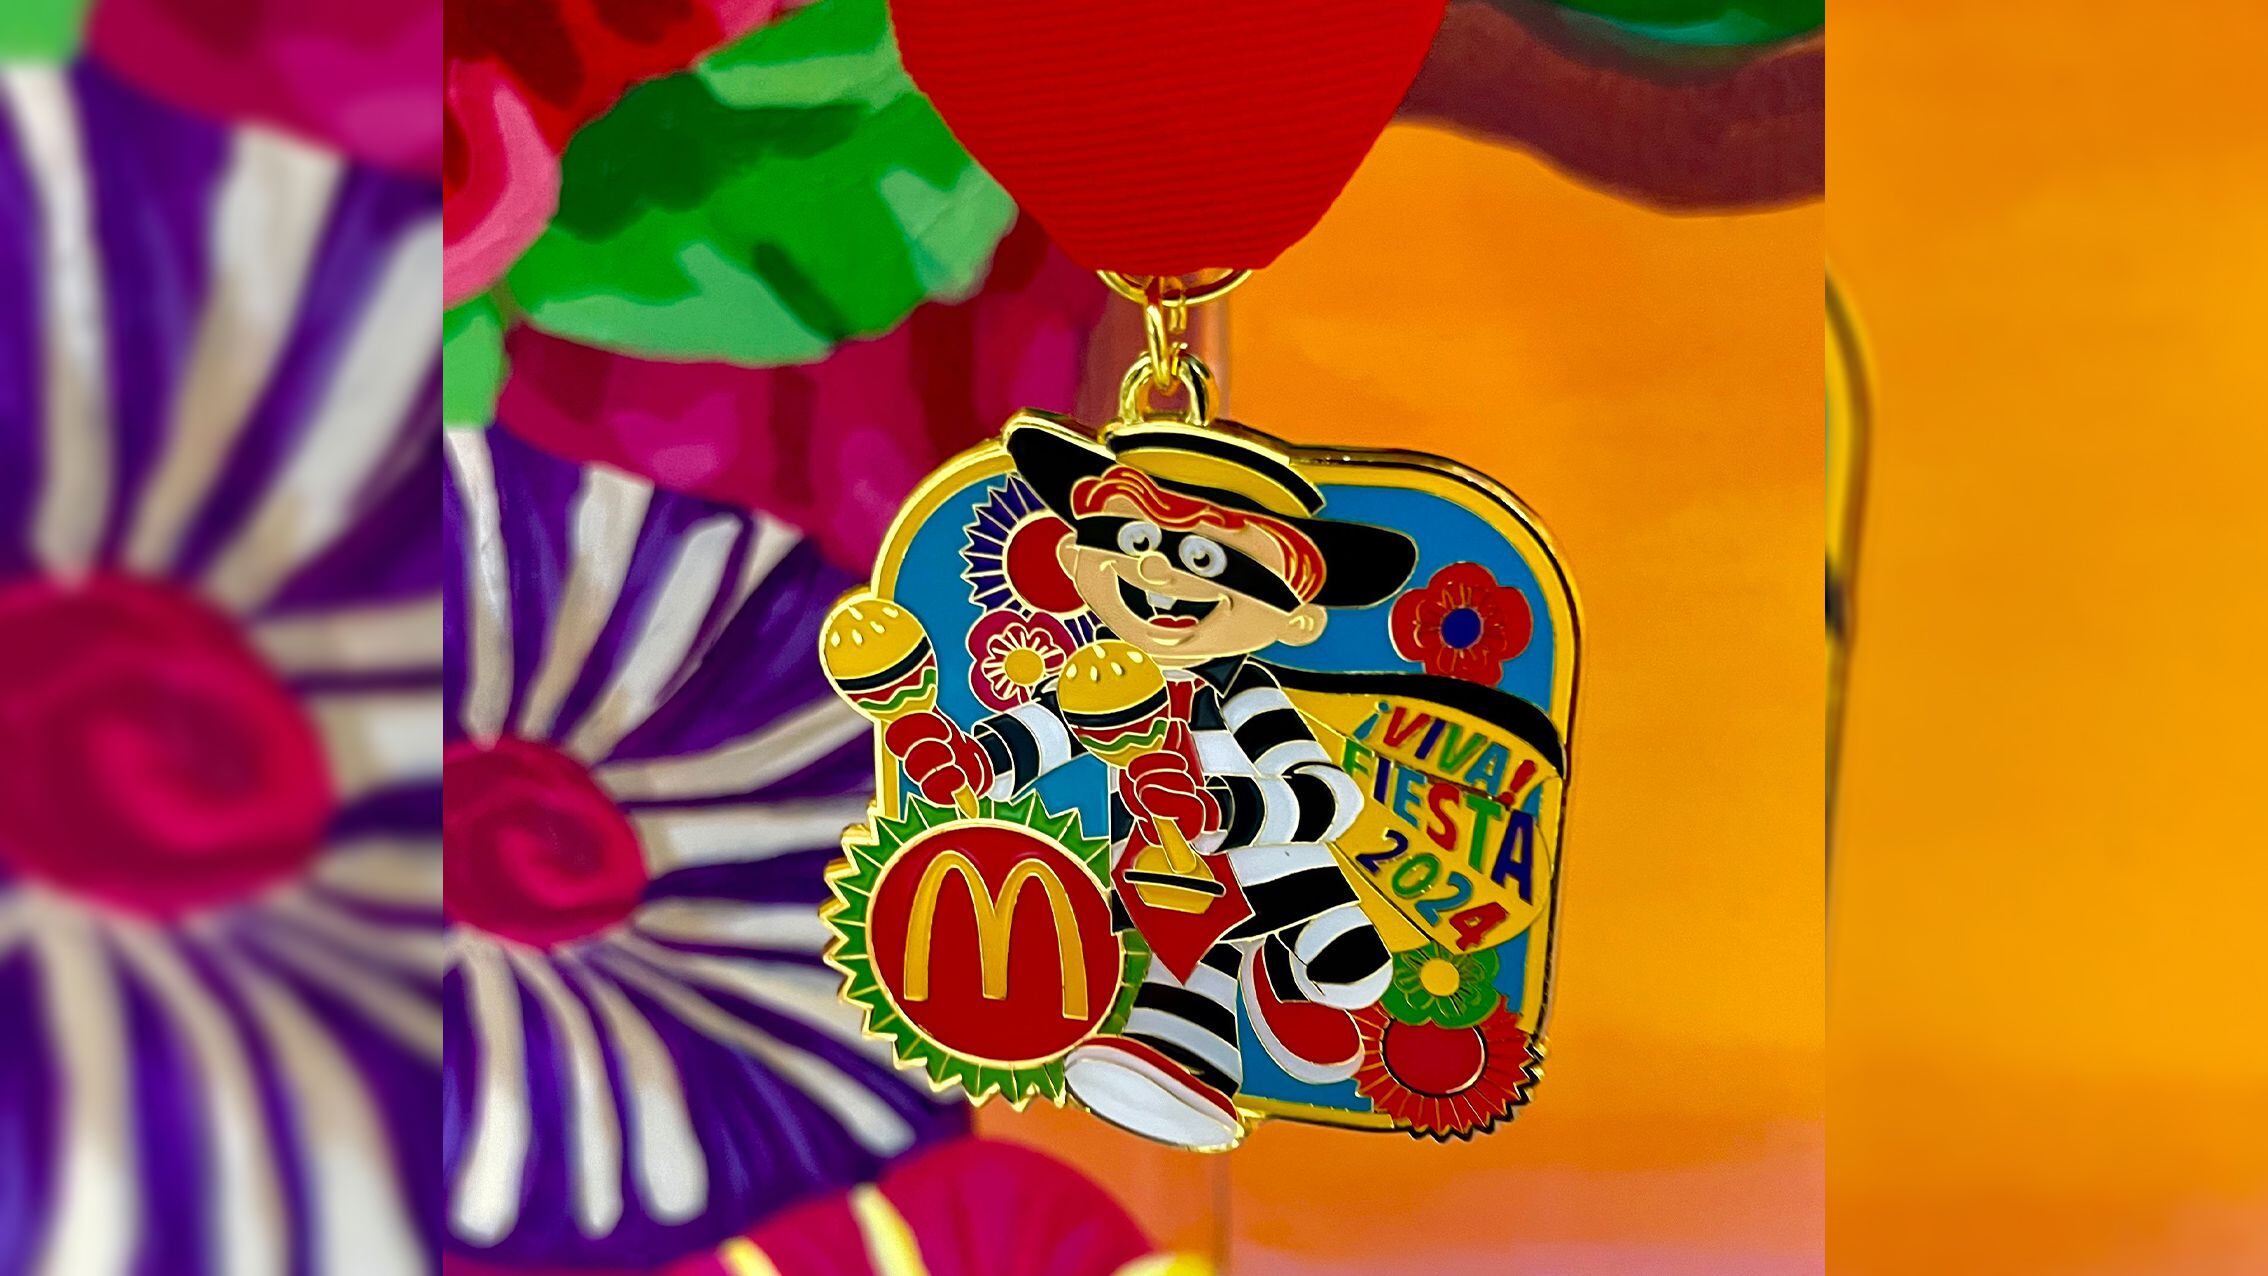 McDonald's is selling Fiesta medals for $8 each at participating locations.